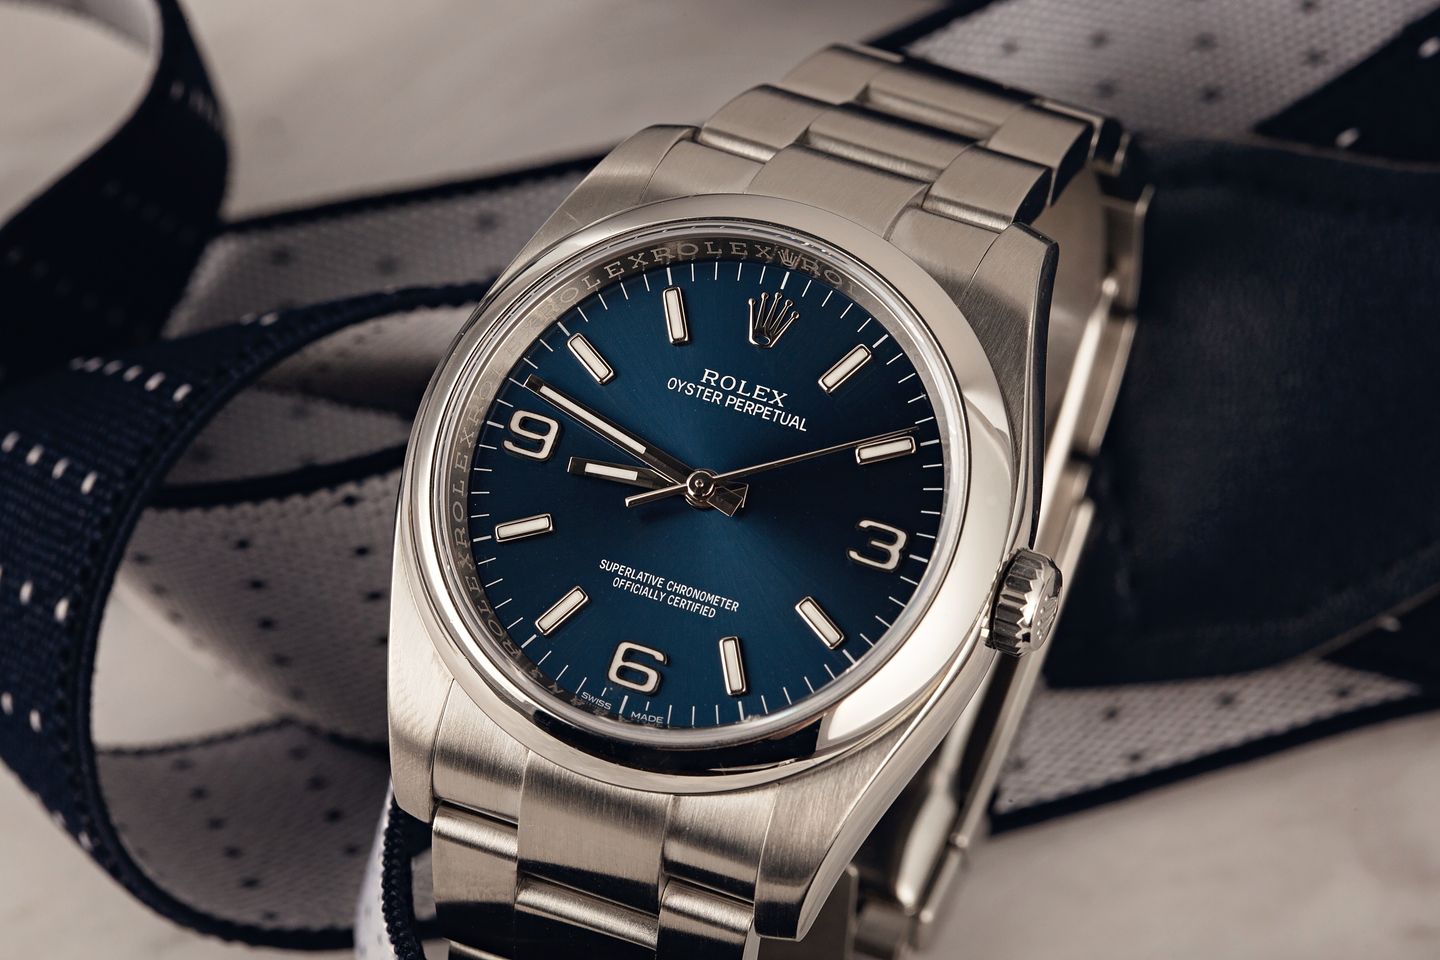 Rolex Oyster Perpetual model vs range definition guide